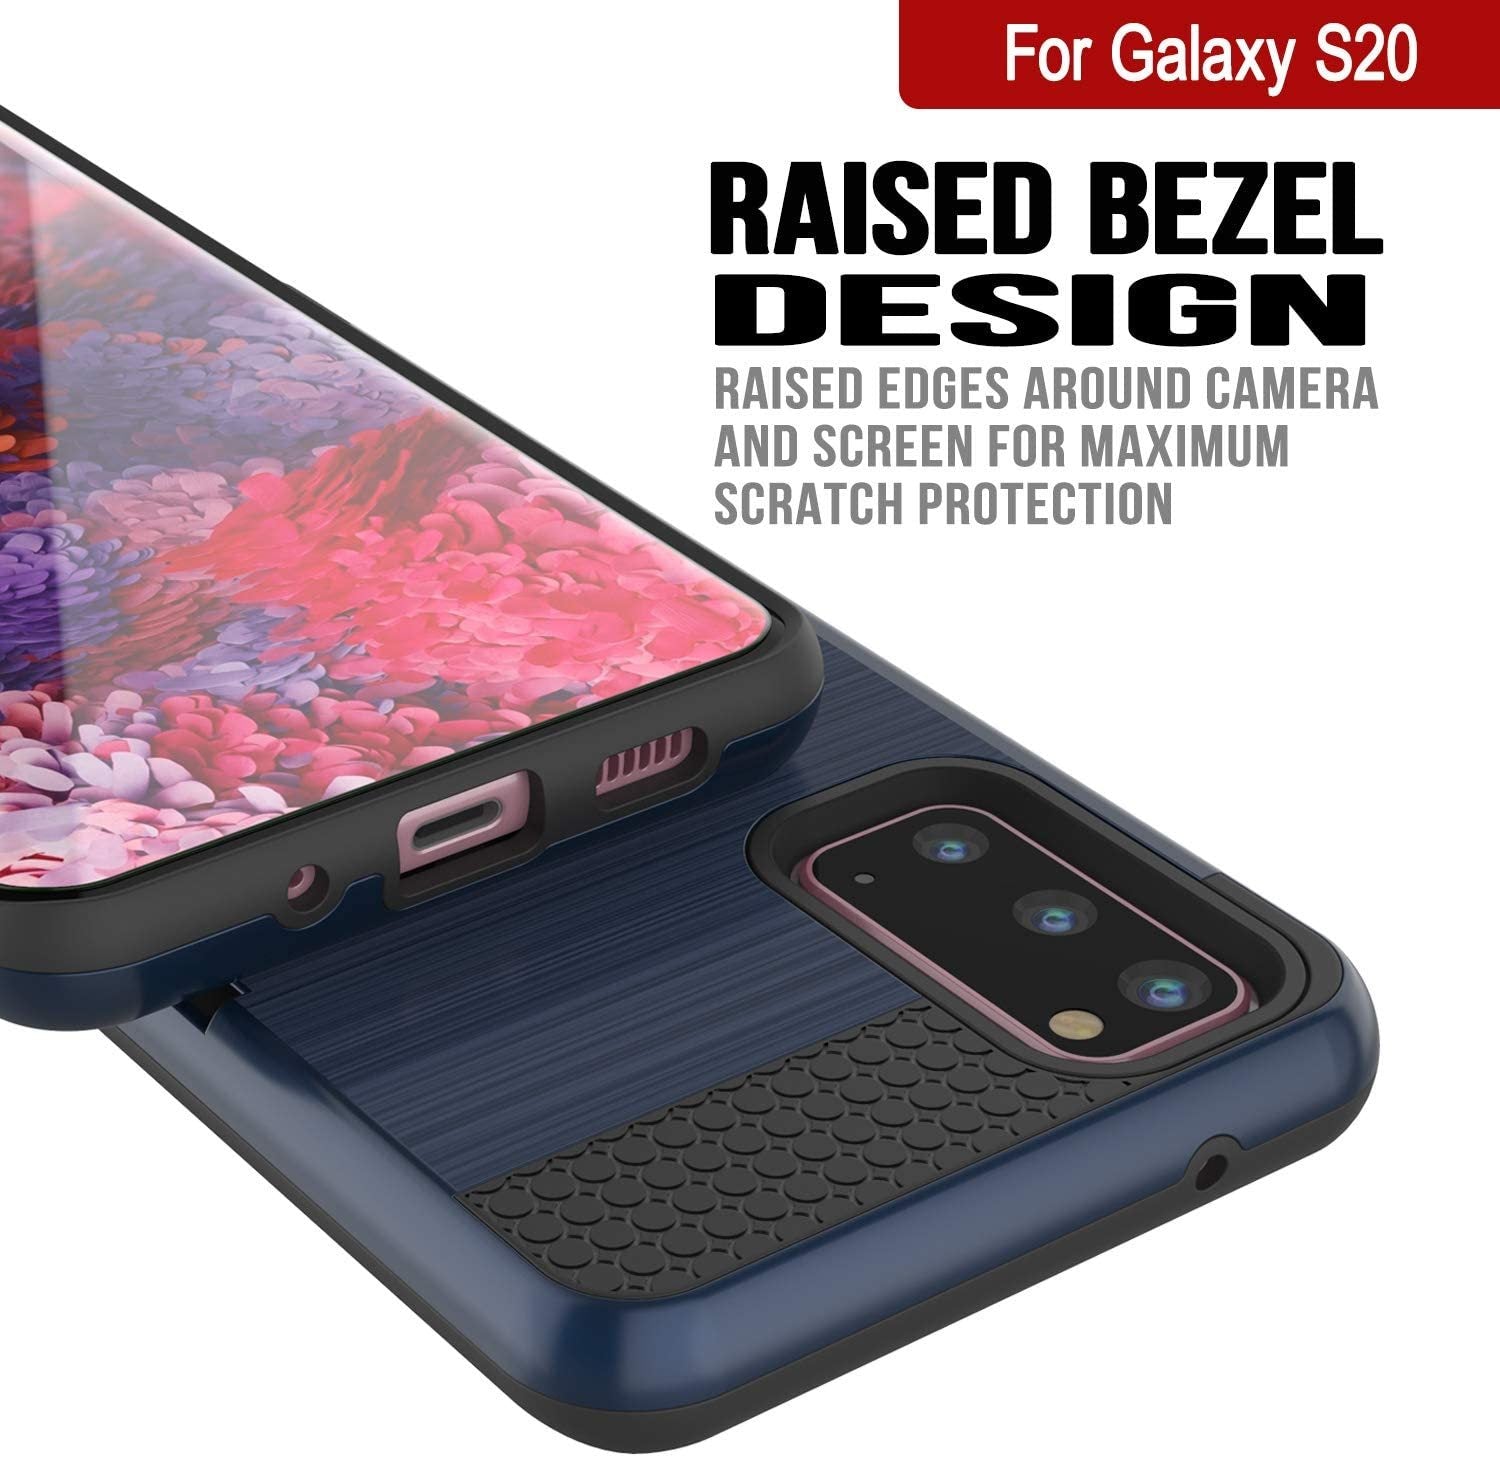 Galaxy S20 Case, PUNKcase [SLOT Series] [Slim Fit] Dual-Layer Armor Cover w/Integrated Anti-Shock System, Credit Card Slot [Navy]